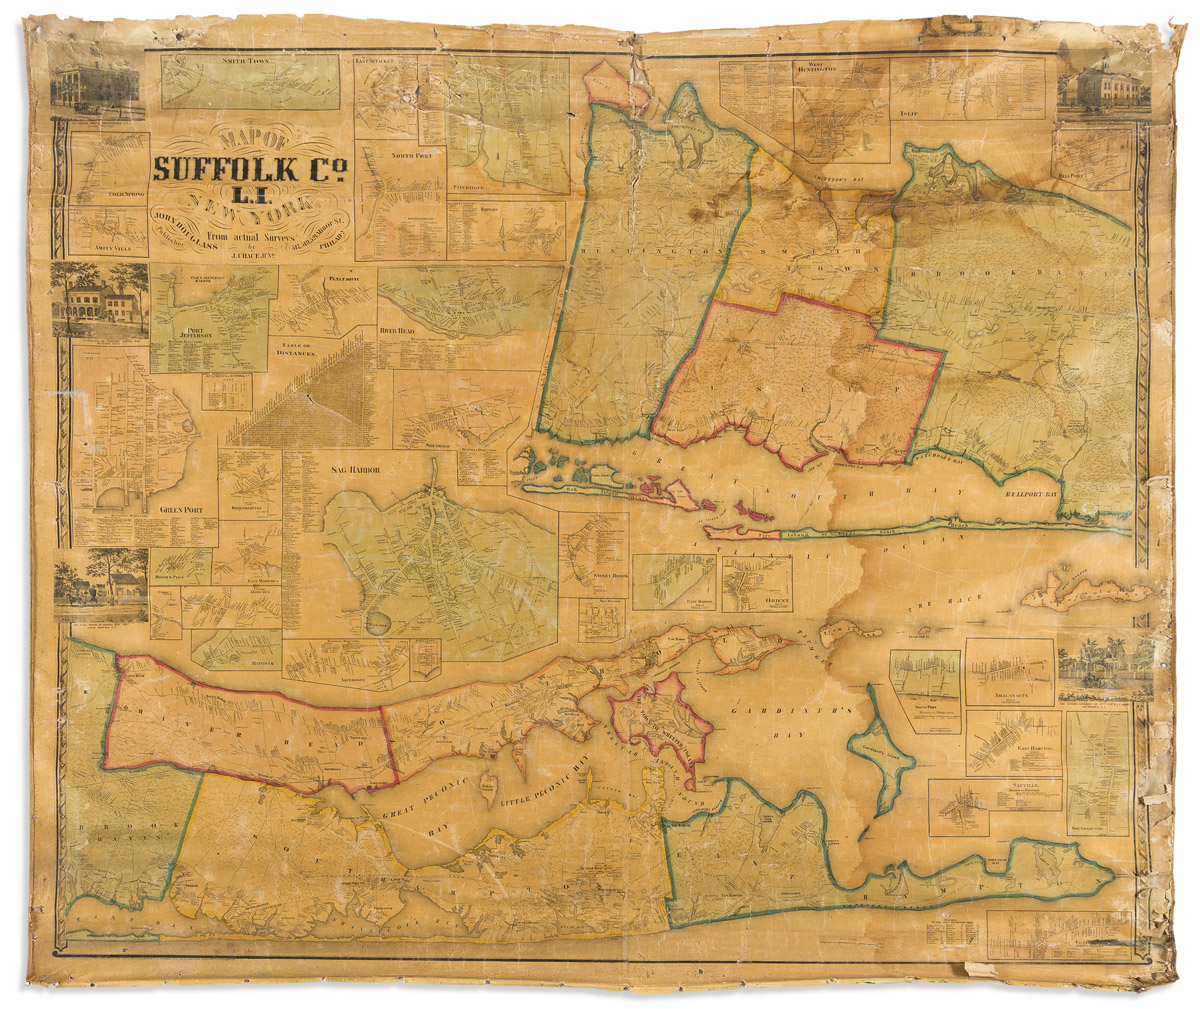 Map of Suffolk Co., L.I. New York.